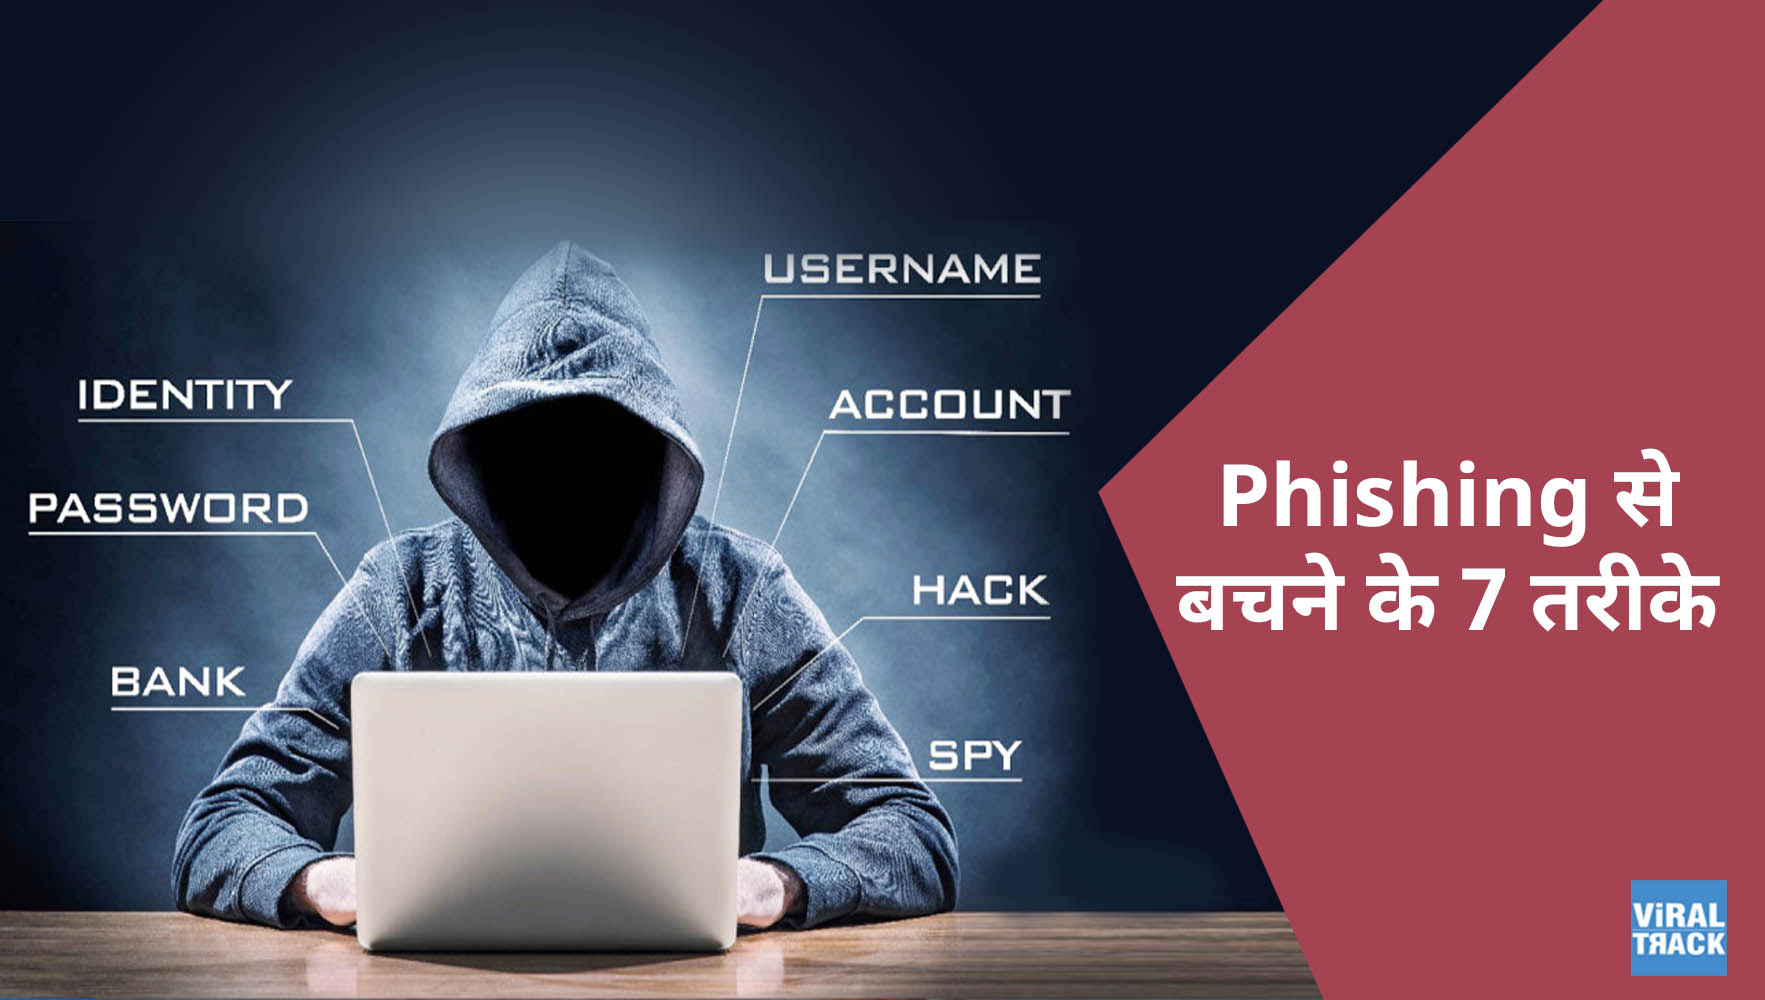 7 steps can save you from Phishing scheme